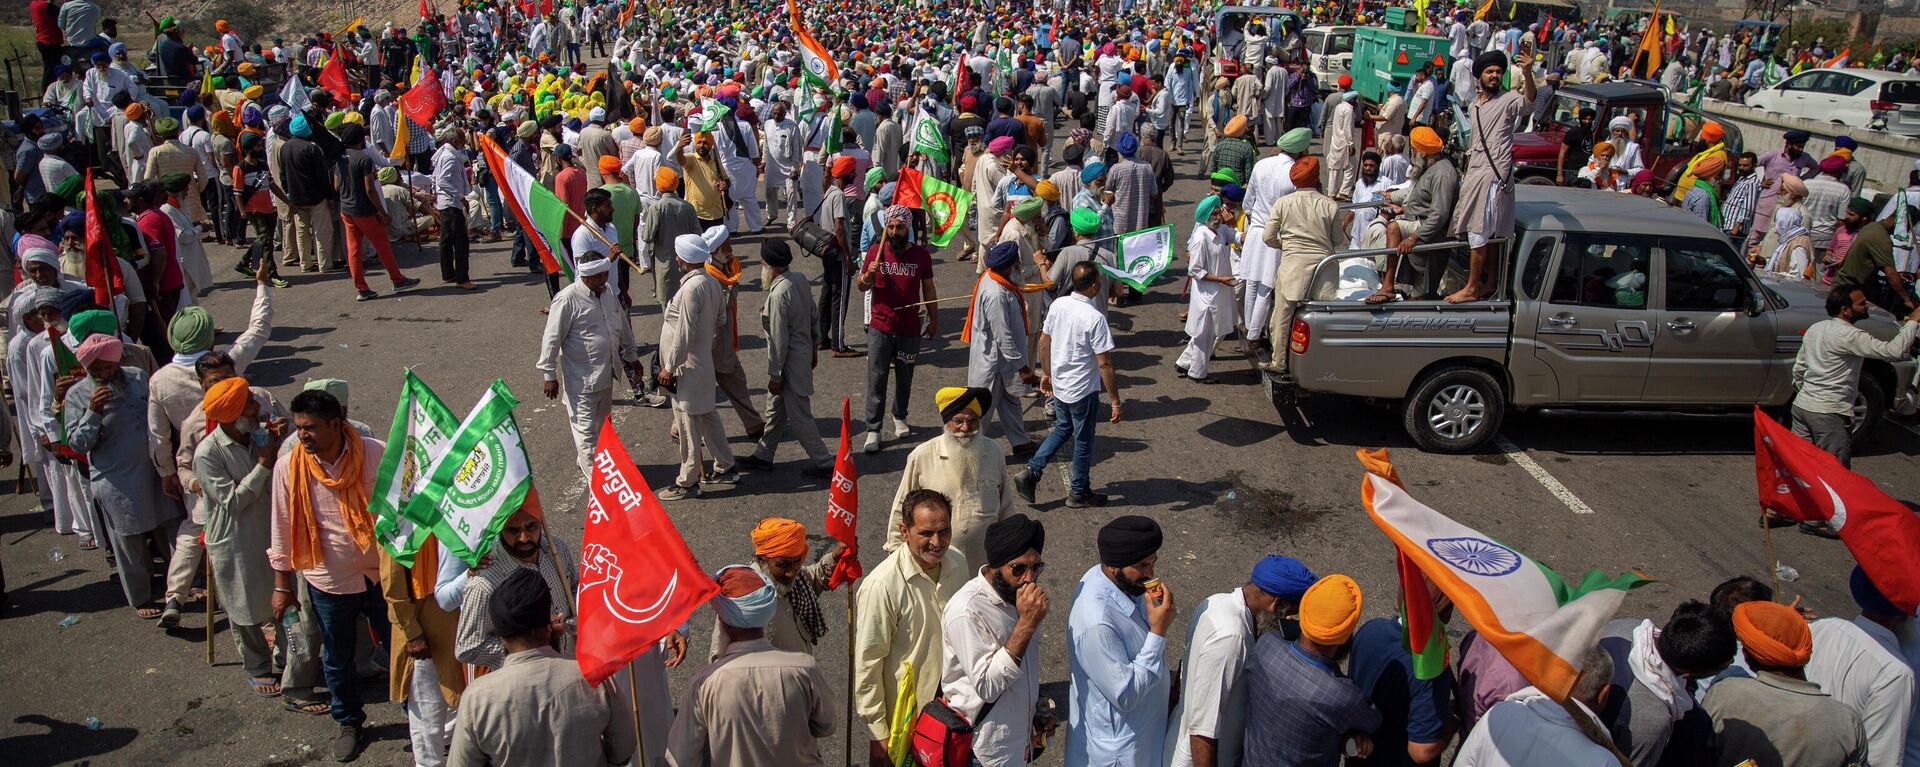 Indian farmers participate in a protest while blocking a major highway to mark 100 days of the ongoing farmer protests against new farm laws along the Delhi-Haryana border near New Delhi, India, Saturday, March 6, 2021. Thousands of farmers have hunkered down outside New Delhi’s borders since late November to voice their anger against three laws passed by Parliament last year. Prime Minister Narendra Modi’s government says the laws are necessary to modernize agriculture but farmers say they will leave them poorer and at the mercy of big corporations.  - Sputnik International, 1920, 19.11.2021